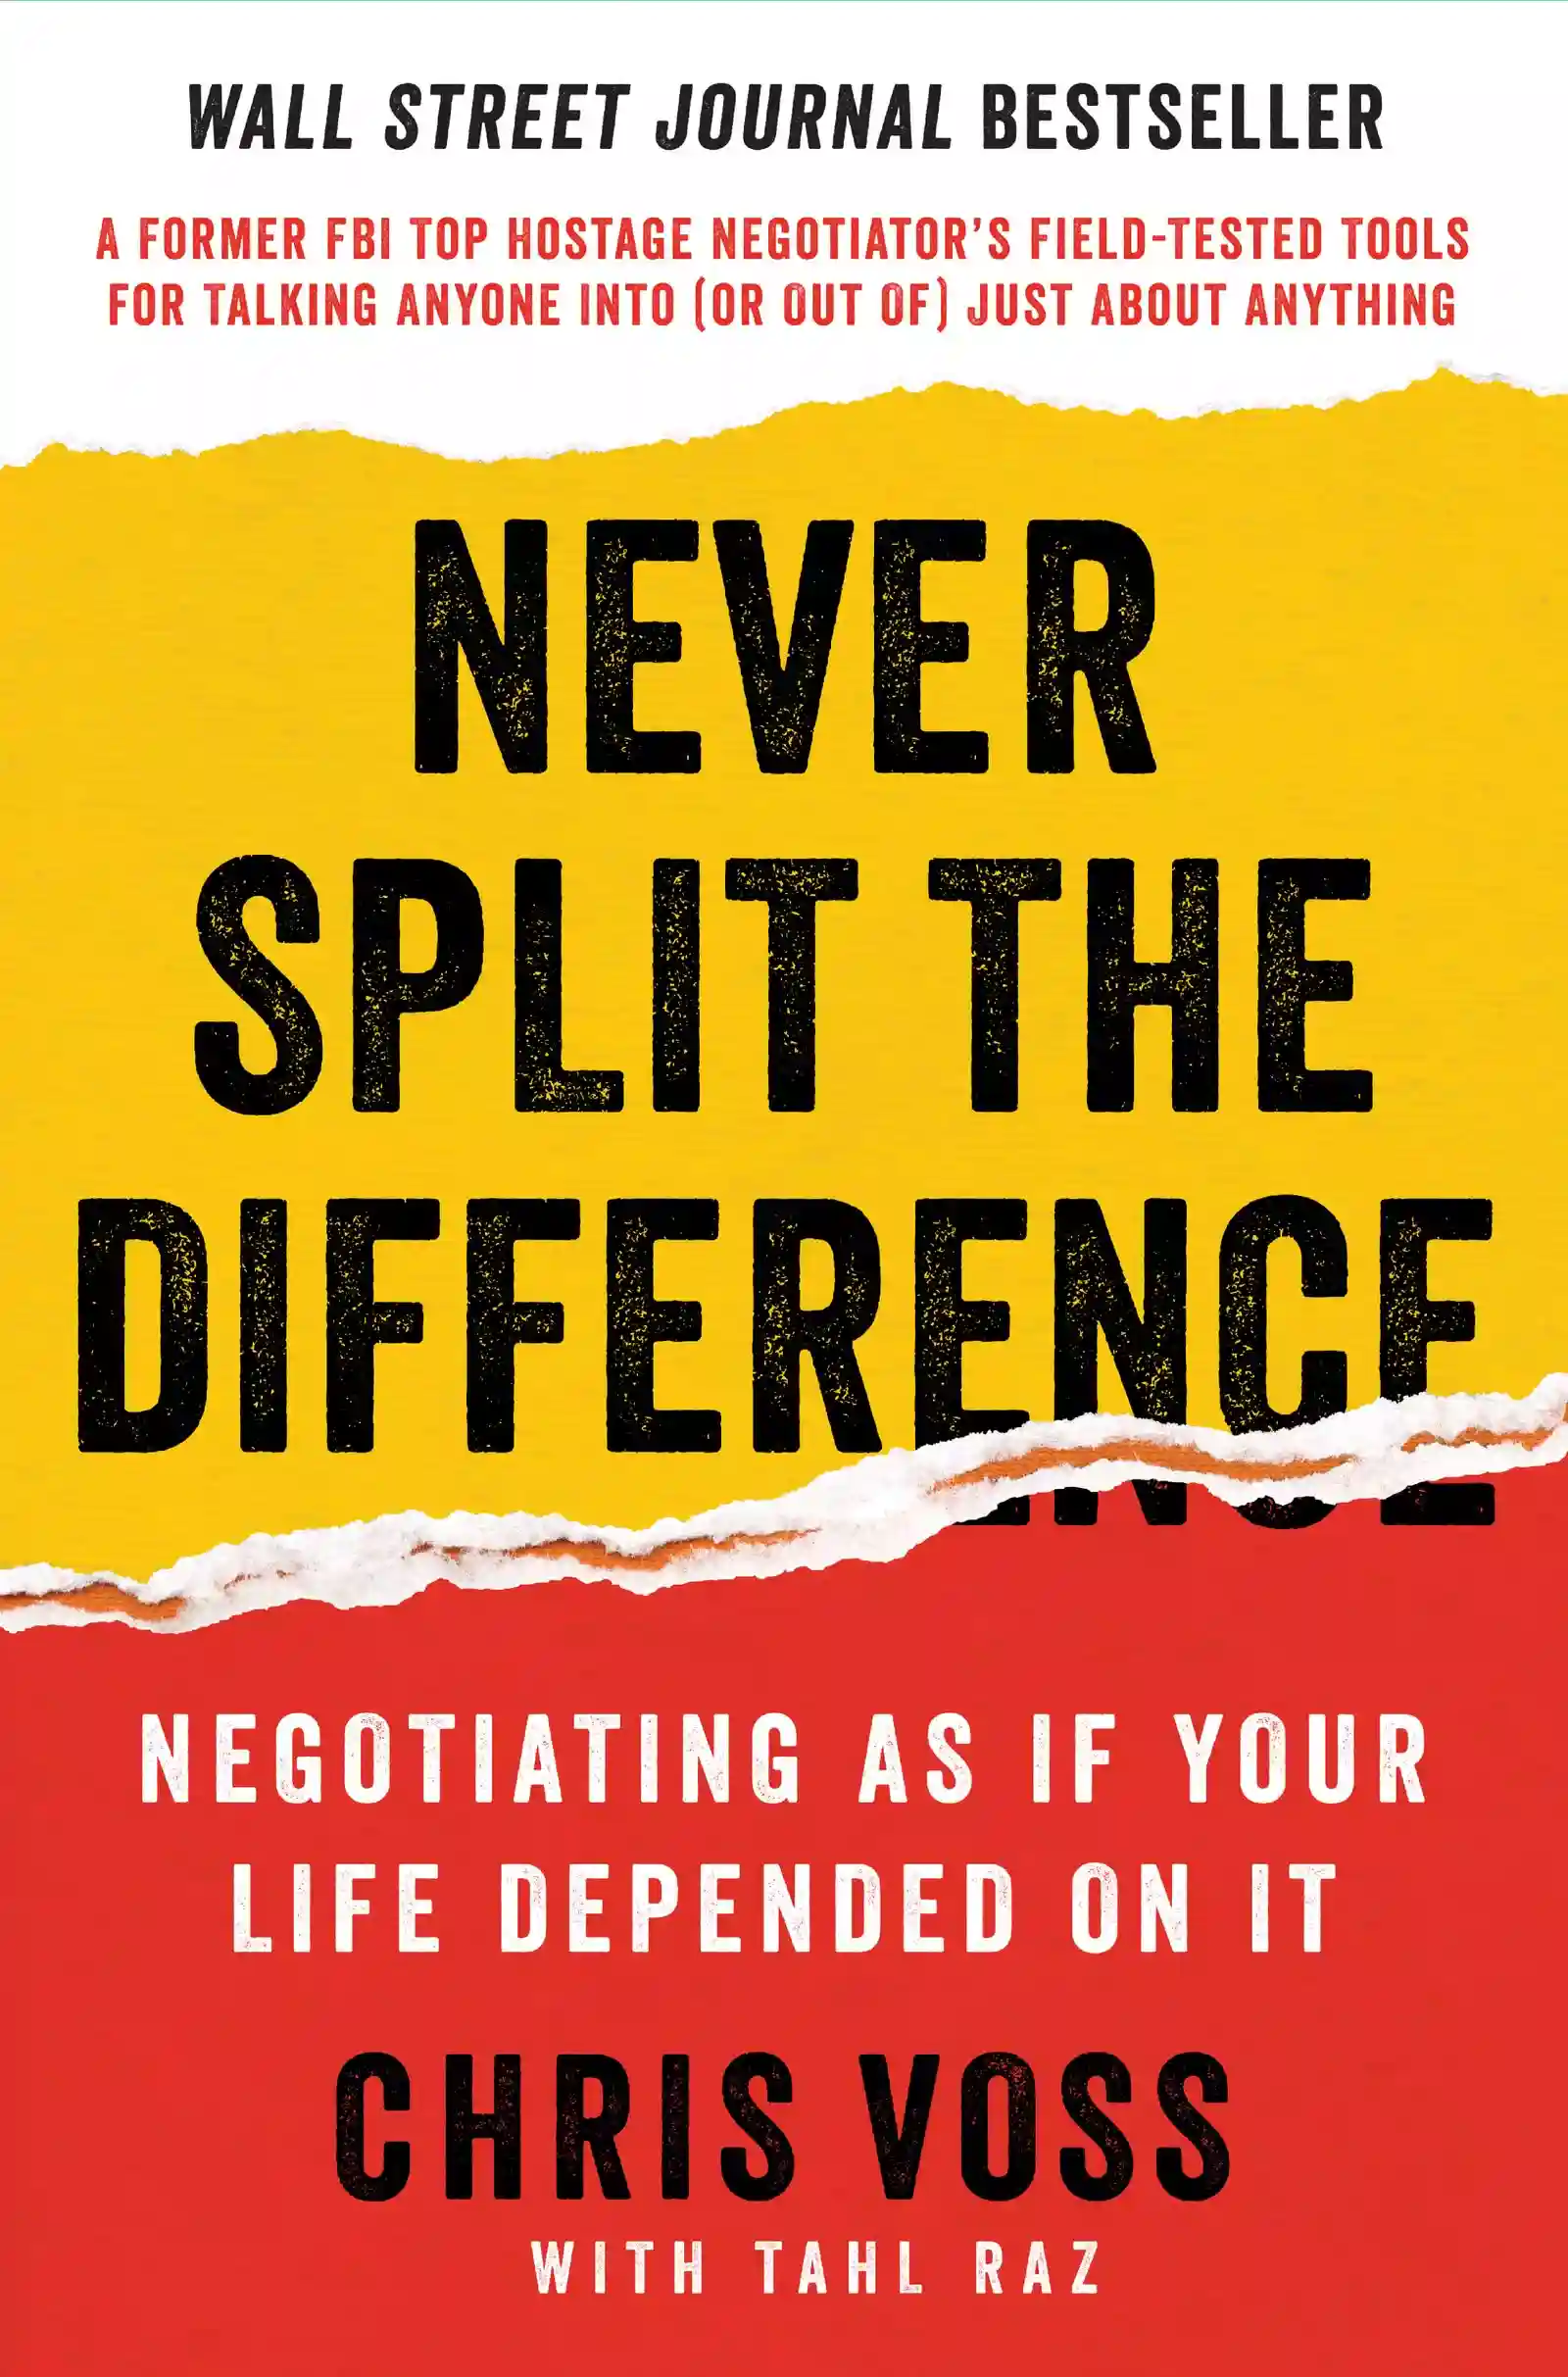 A former FBI hostage negotiator offers a new, field-tested approach to negotiating – effective in any situation.
Never Split the Difference: Negotiating As If Your Life Depended On It by Chris Voss & Tahl Raz